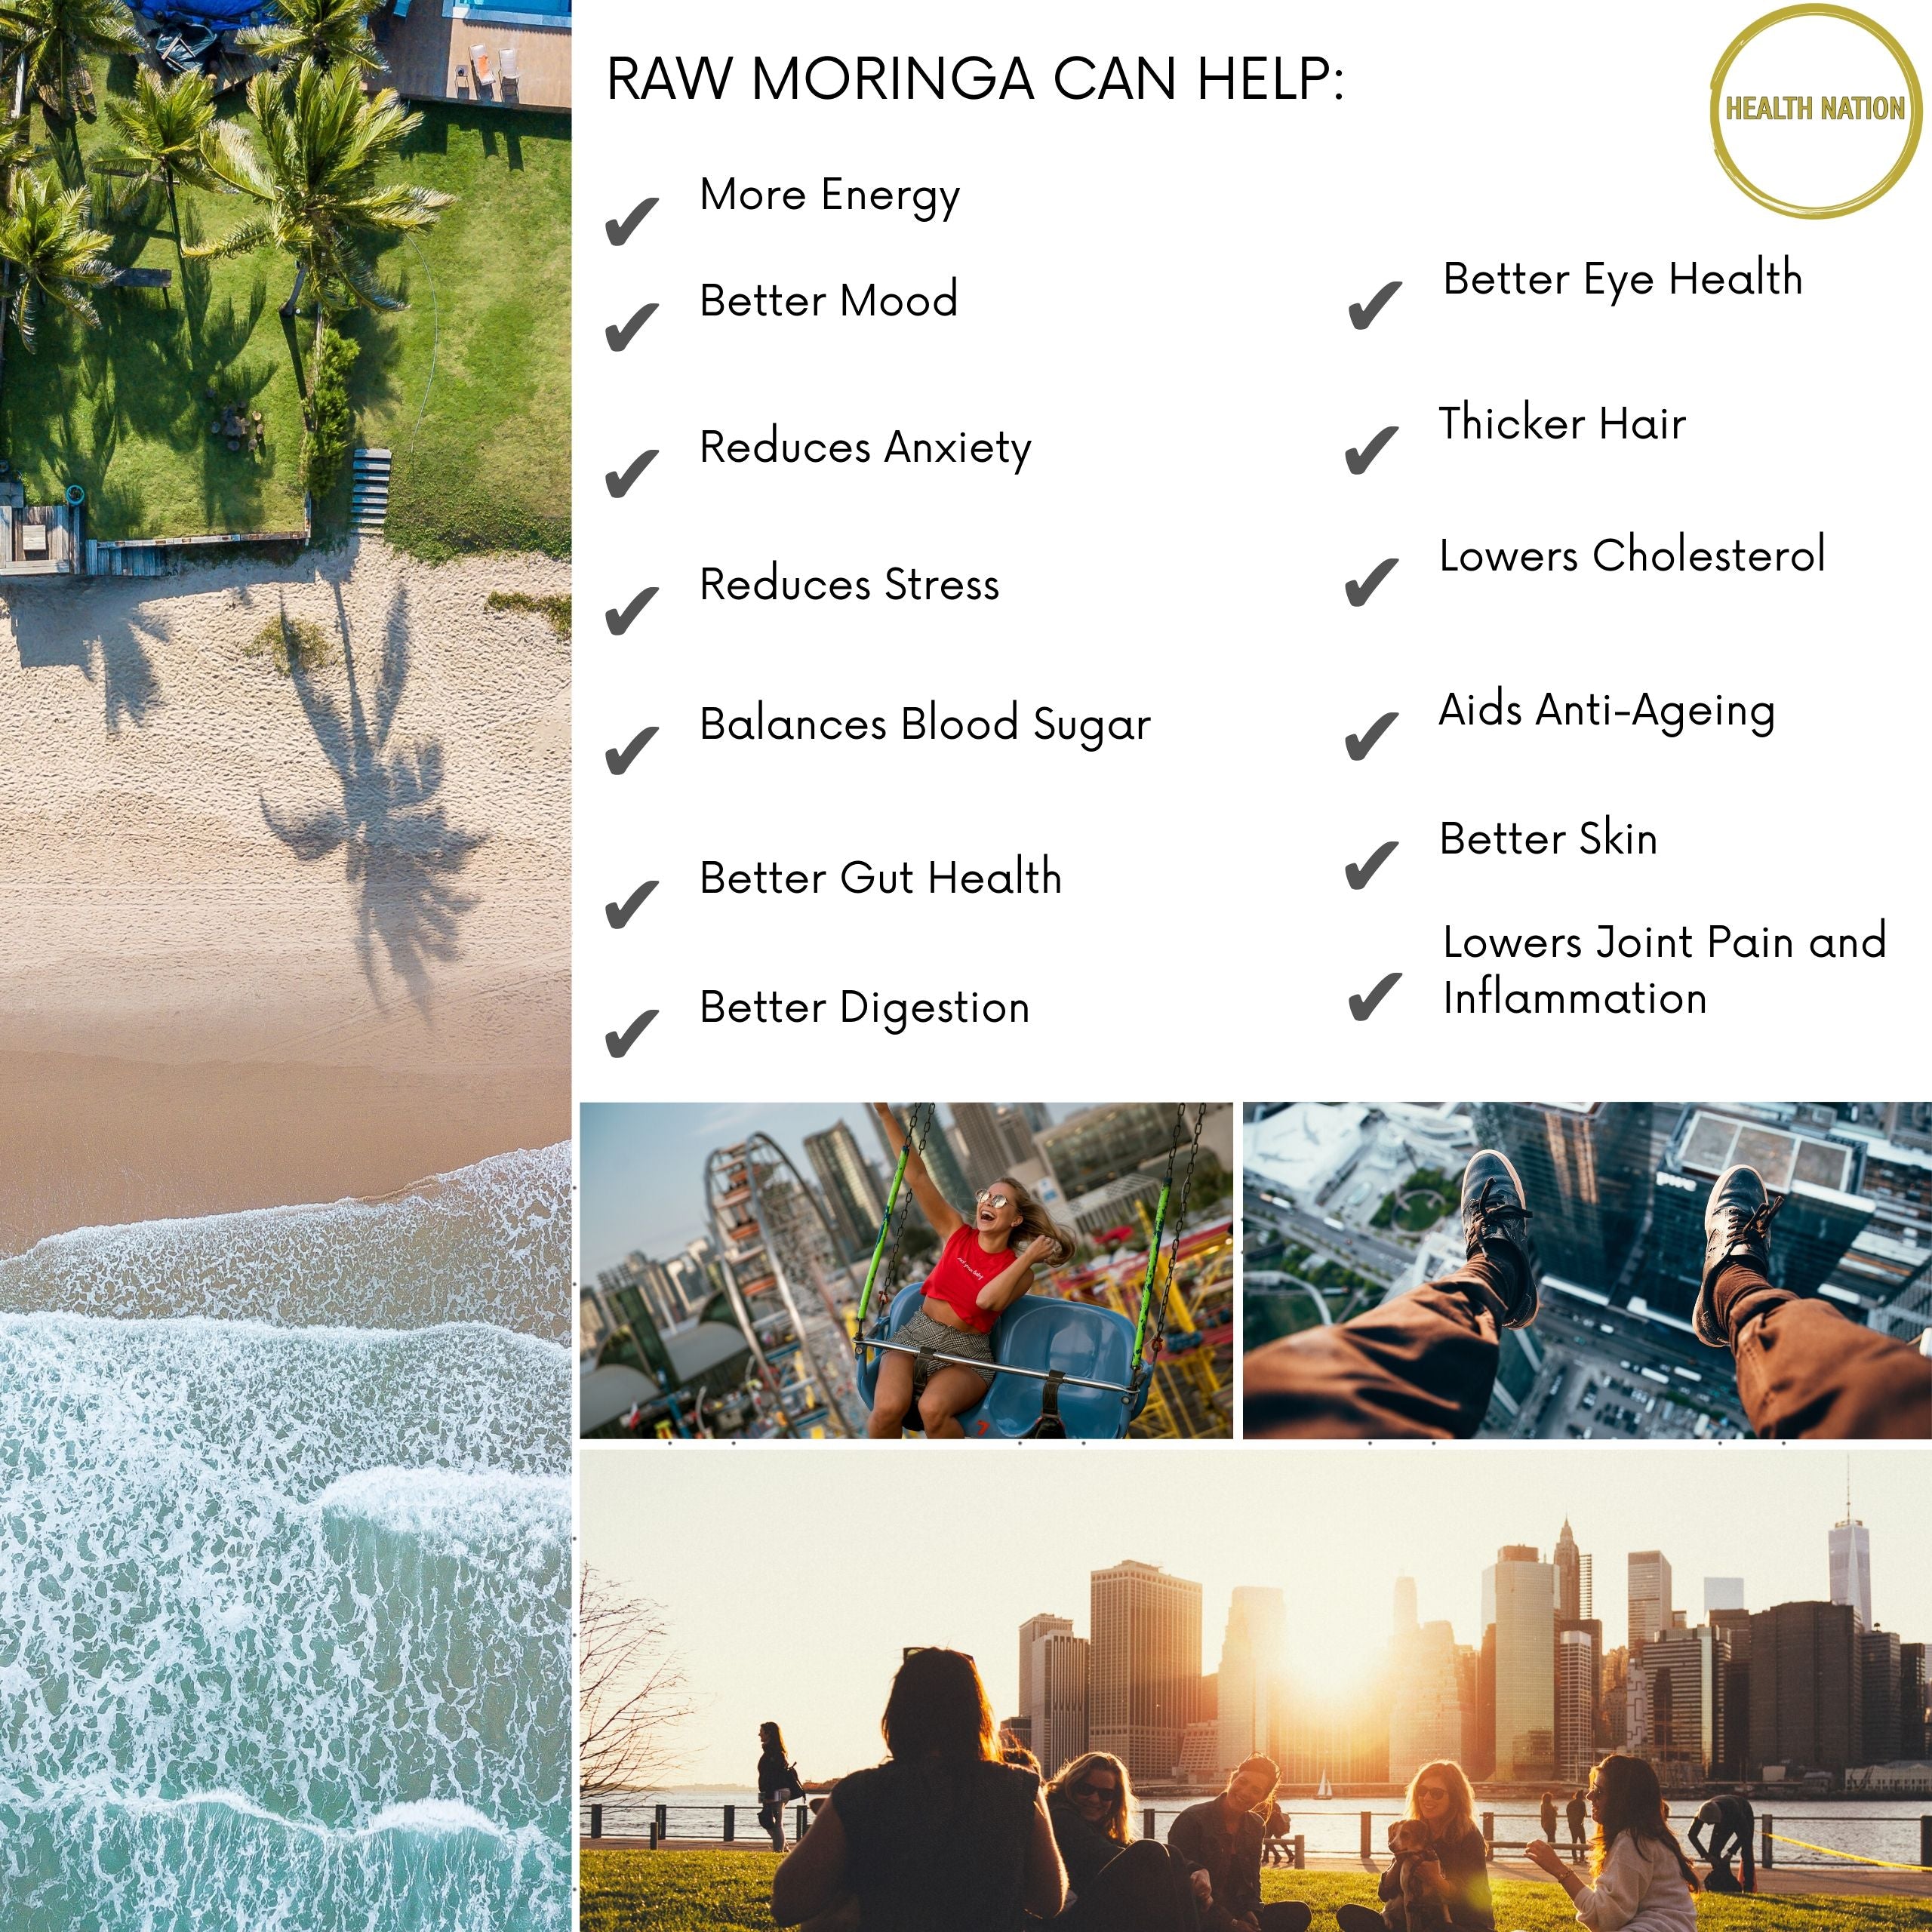 Raw Moringa | Most nutritious superfood on the Planet | Helps with Anxiety, Stress, Mood, Energy, Gut/Digestion, Hair Loss, Eye Health, Anti-Ageing and Balances Blood Sugar | Made in UK | 500mg 120 Capsules - Health Nation